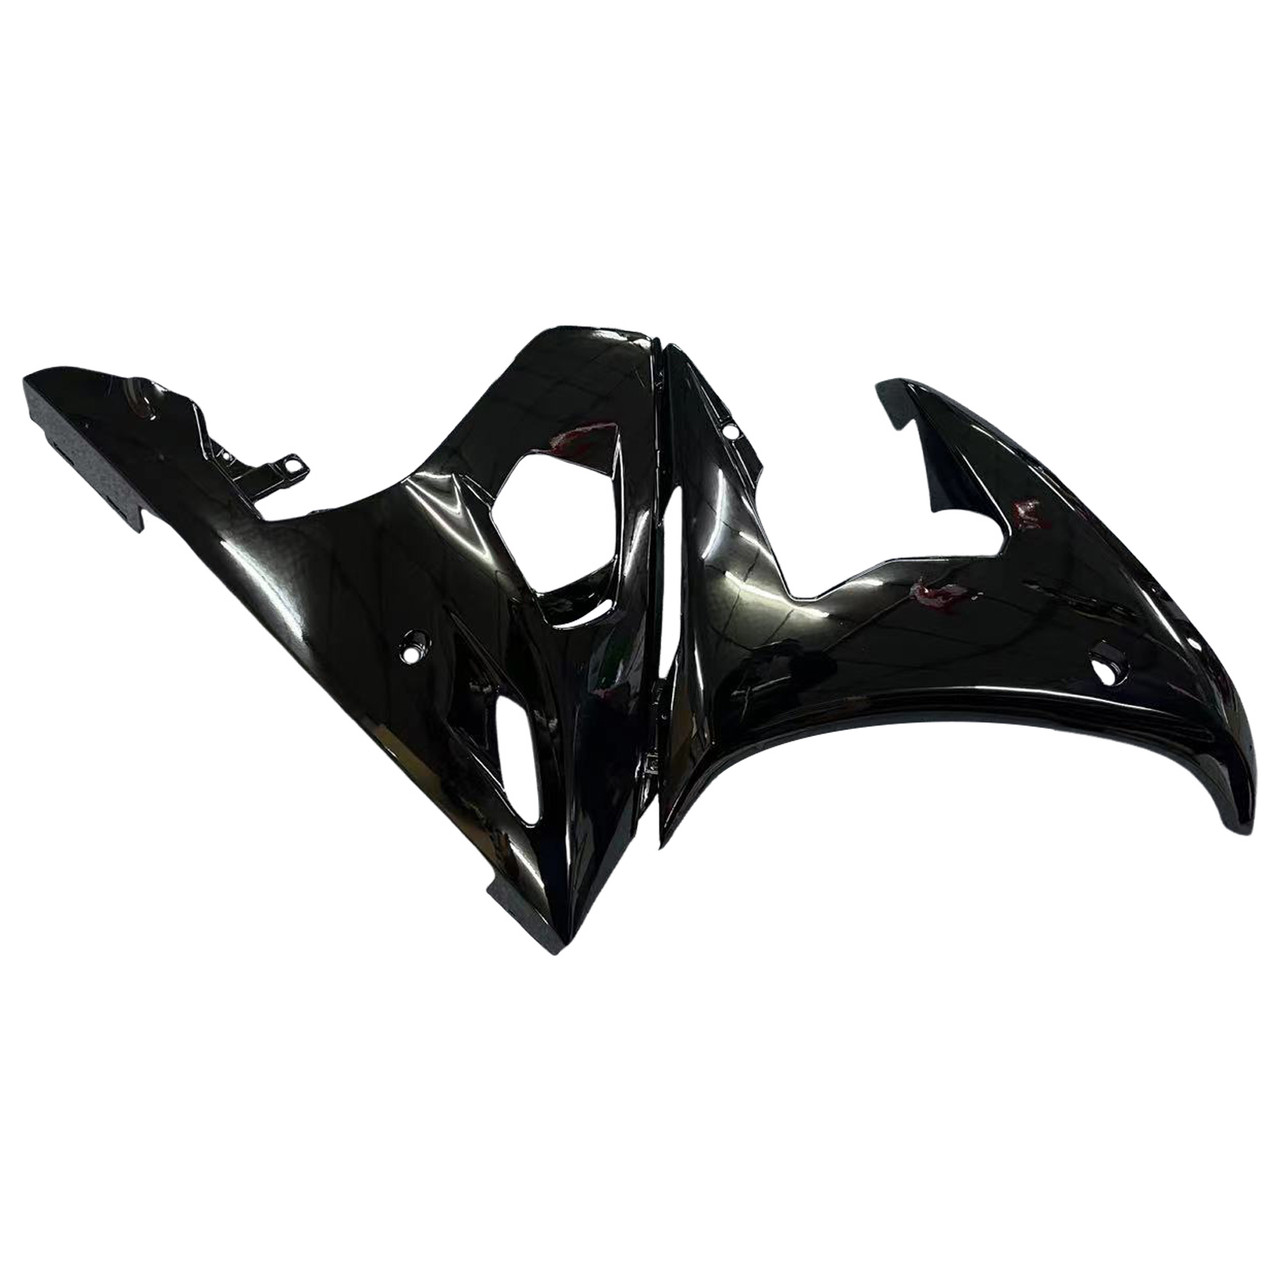 Amotopart Fairing Injection Plastic Kit Gloss Black w/bolt Fit For YAMAHA 2005 YZF R6